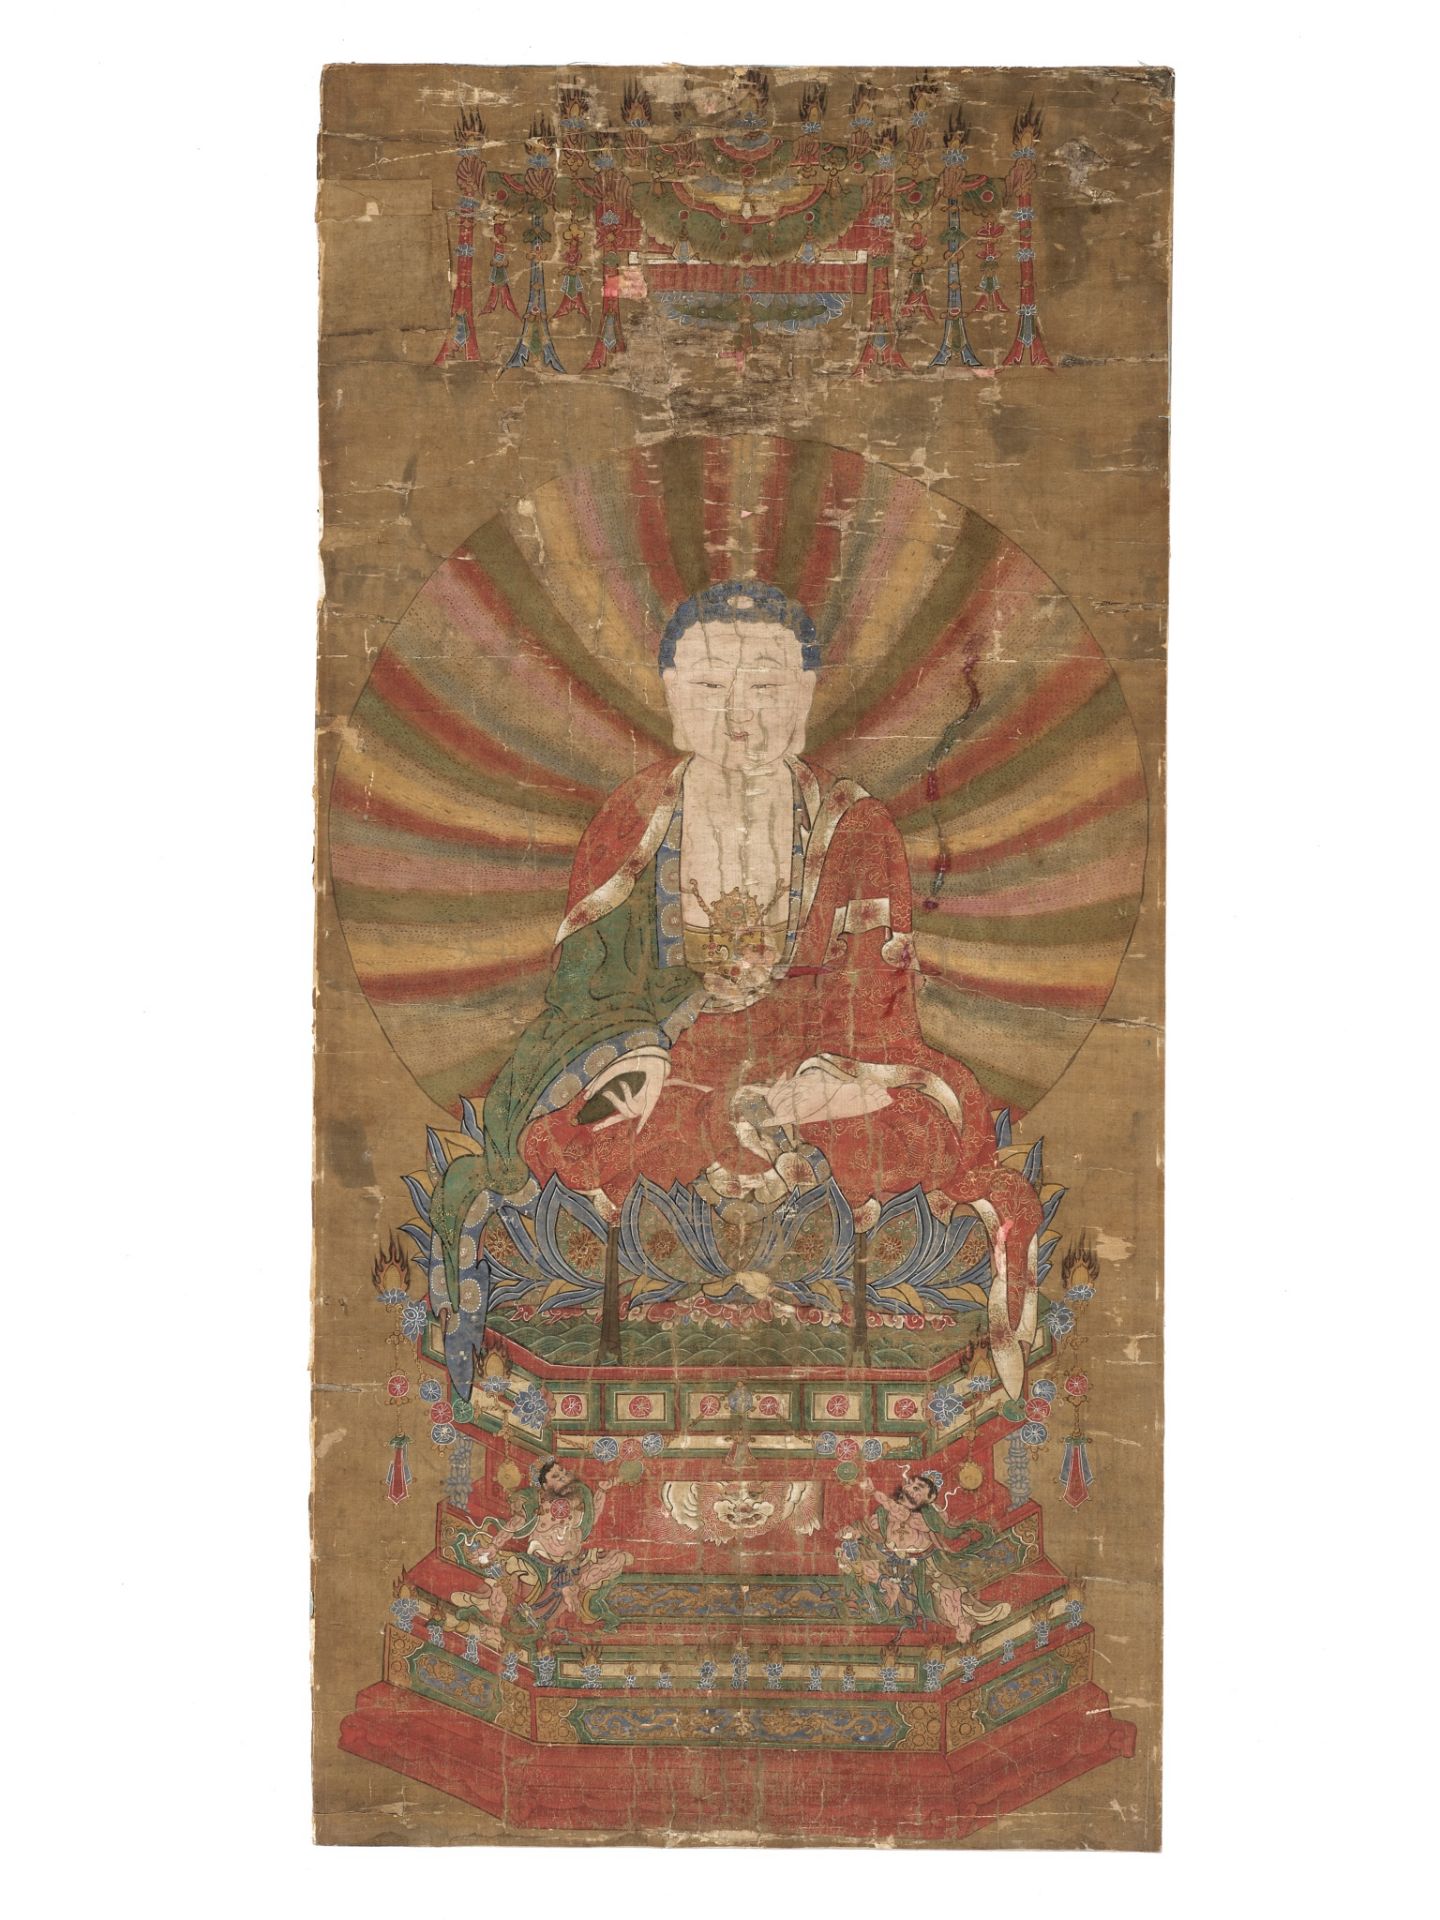 AN IMPORTANT BUDDHIST VOTIVE PAINTING DEPICTING BUDDHA, EARLY MING DYNASTY, 1400-1450 - Bild 2 aus 10